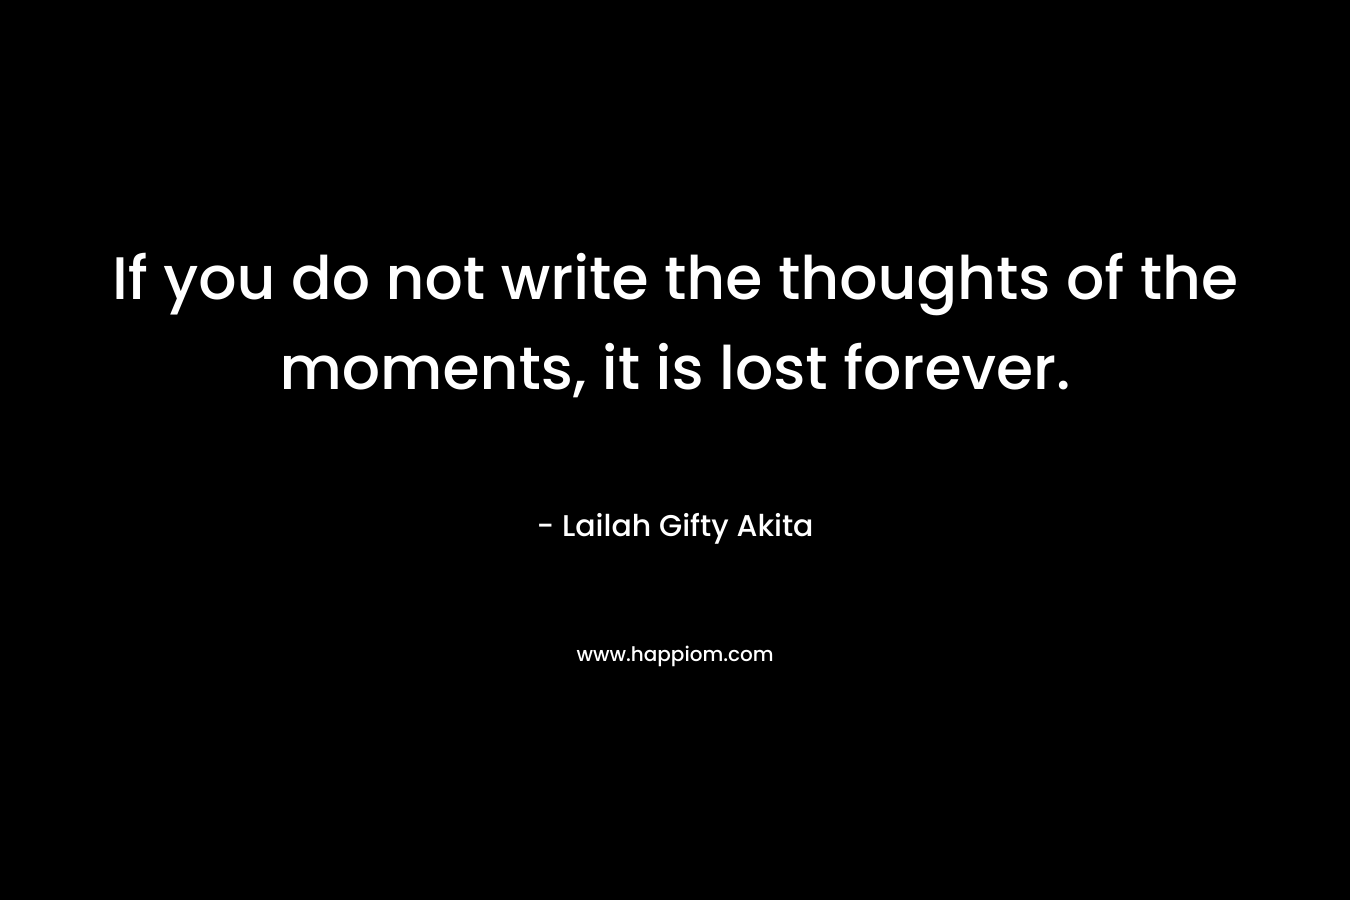 If you do not write the thoughts of the moments, it is lost forever.